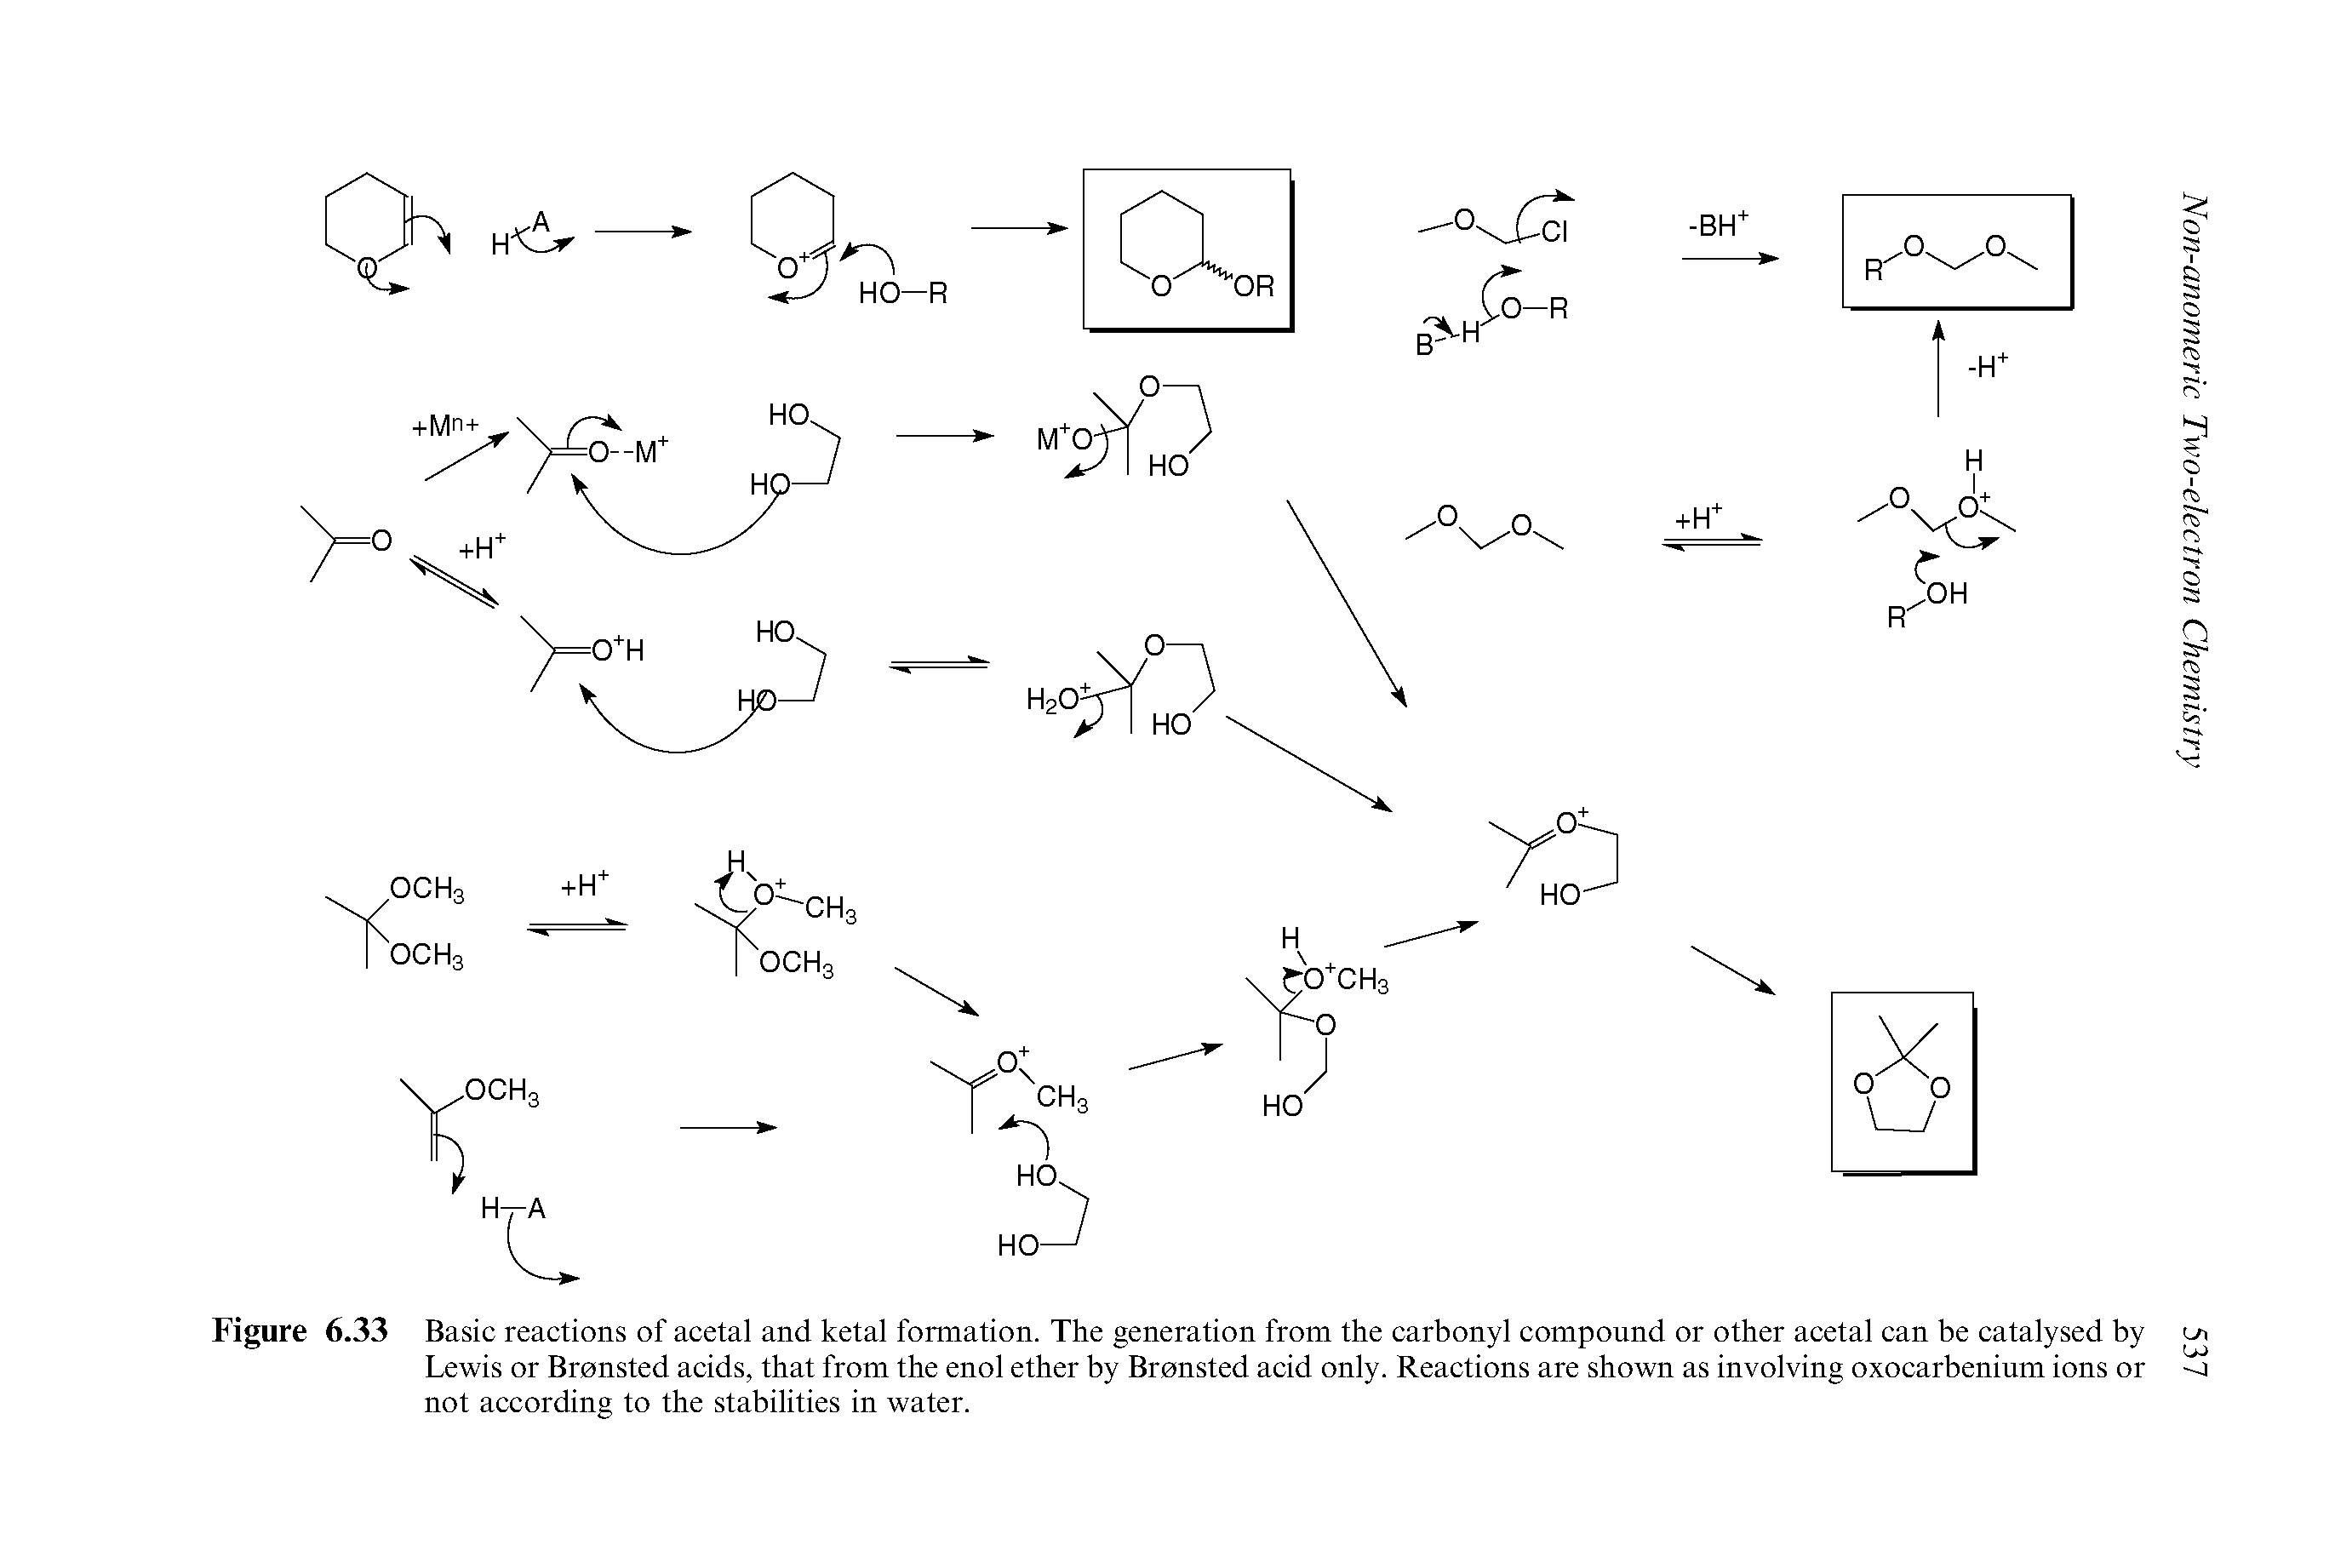 Figure 6.33 Basic reactions of acetal and ketal formation. The generation from the carbonyl compound or other acetal can be catalysed by Lewis or Bronsted acids, that from the enol ether by Bronsted acid only. Reactions are shown as involving oxocarbenium ions or not according to the stabilities in water.